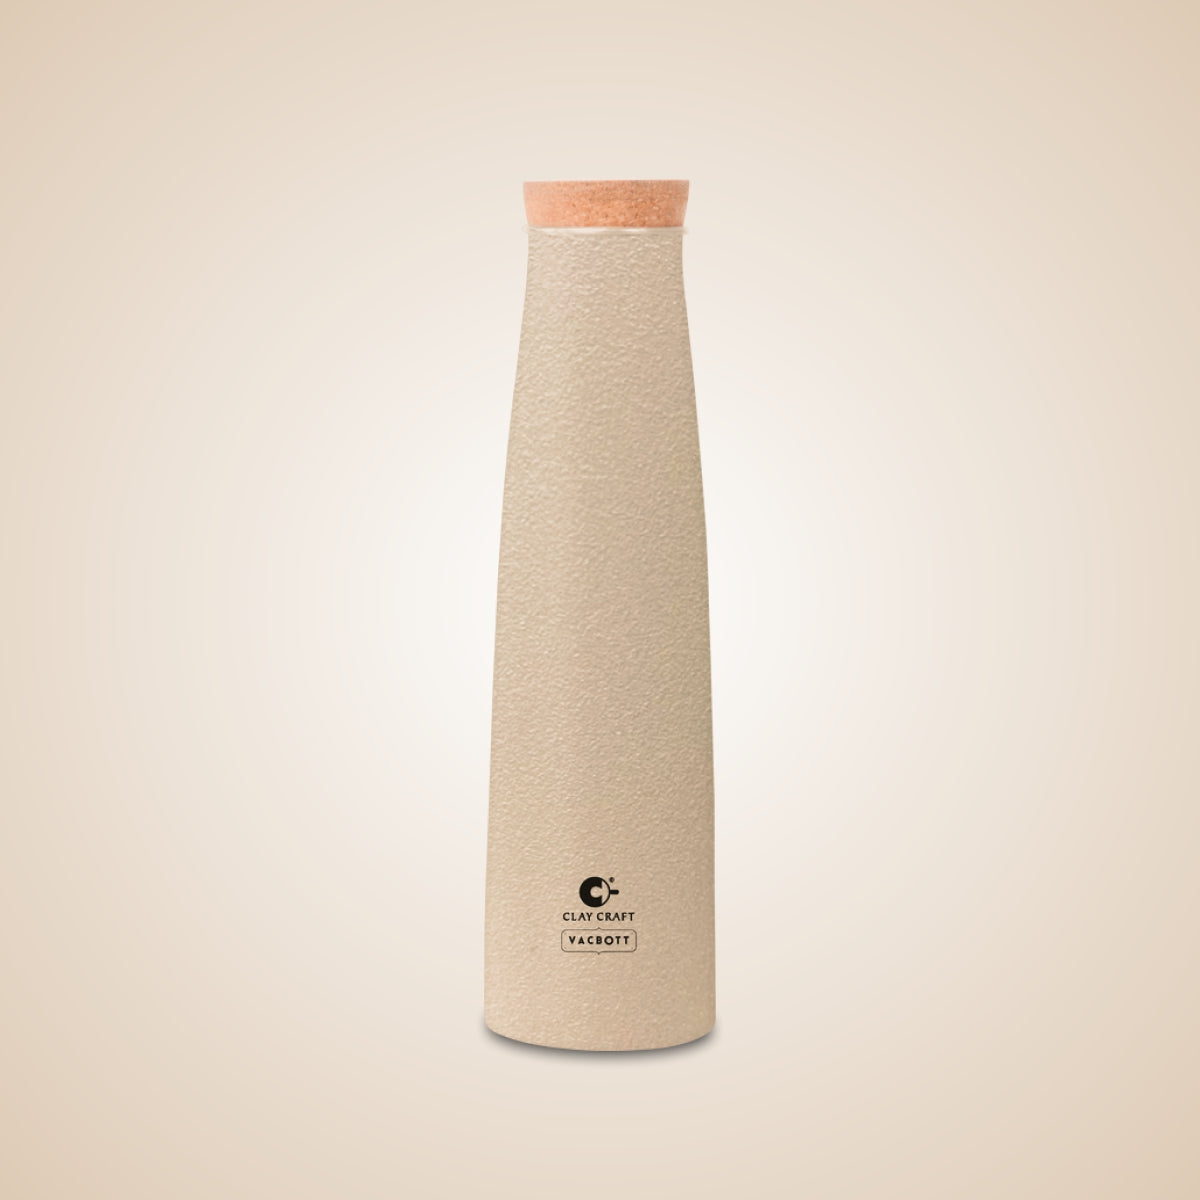 Vacbott Chariott Single Walled Non Insulated Water Bottle, 900ml, with Cork Stopper